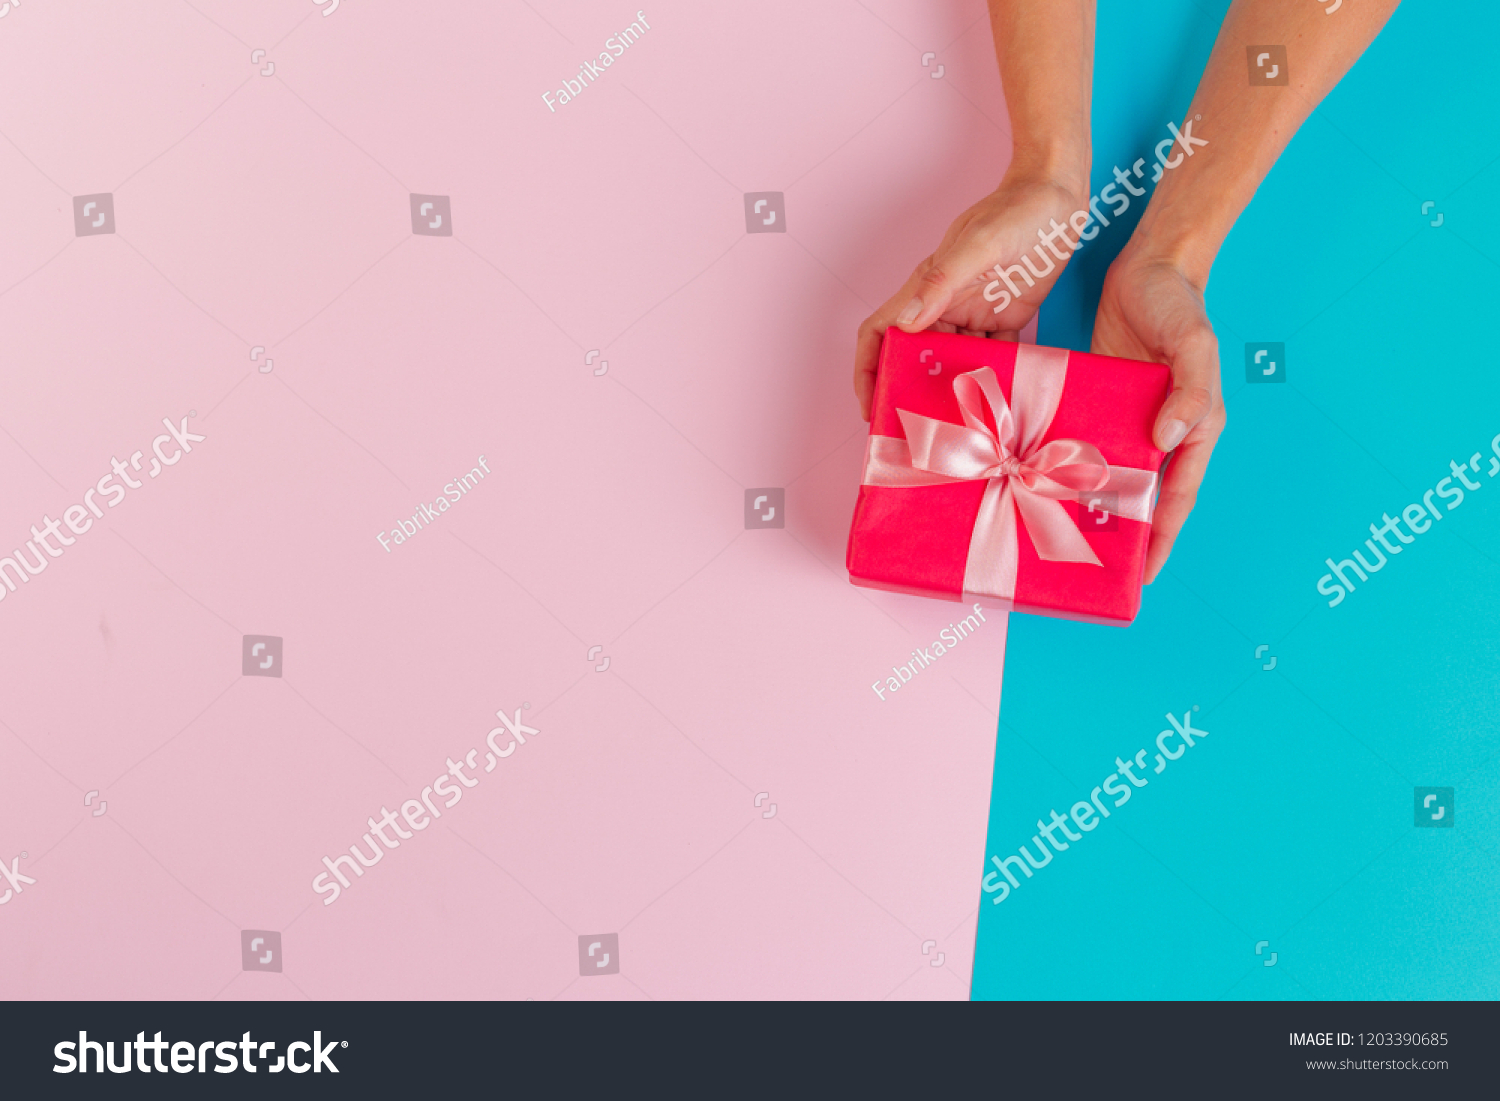 Woman holding gift box on color background #1203390685